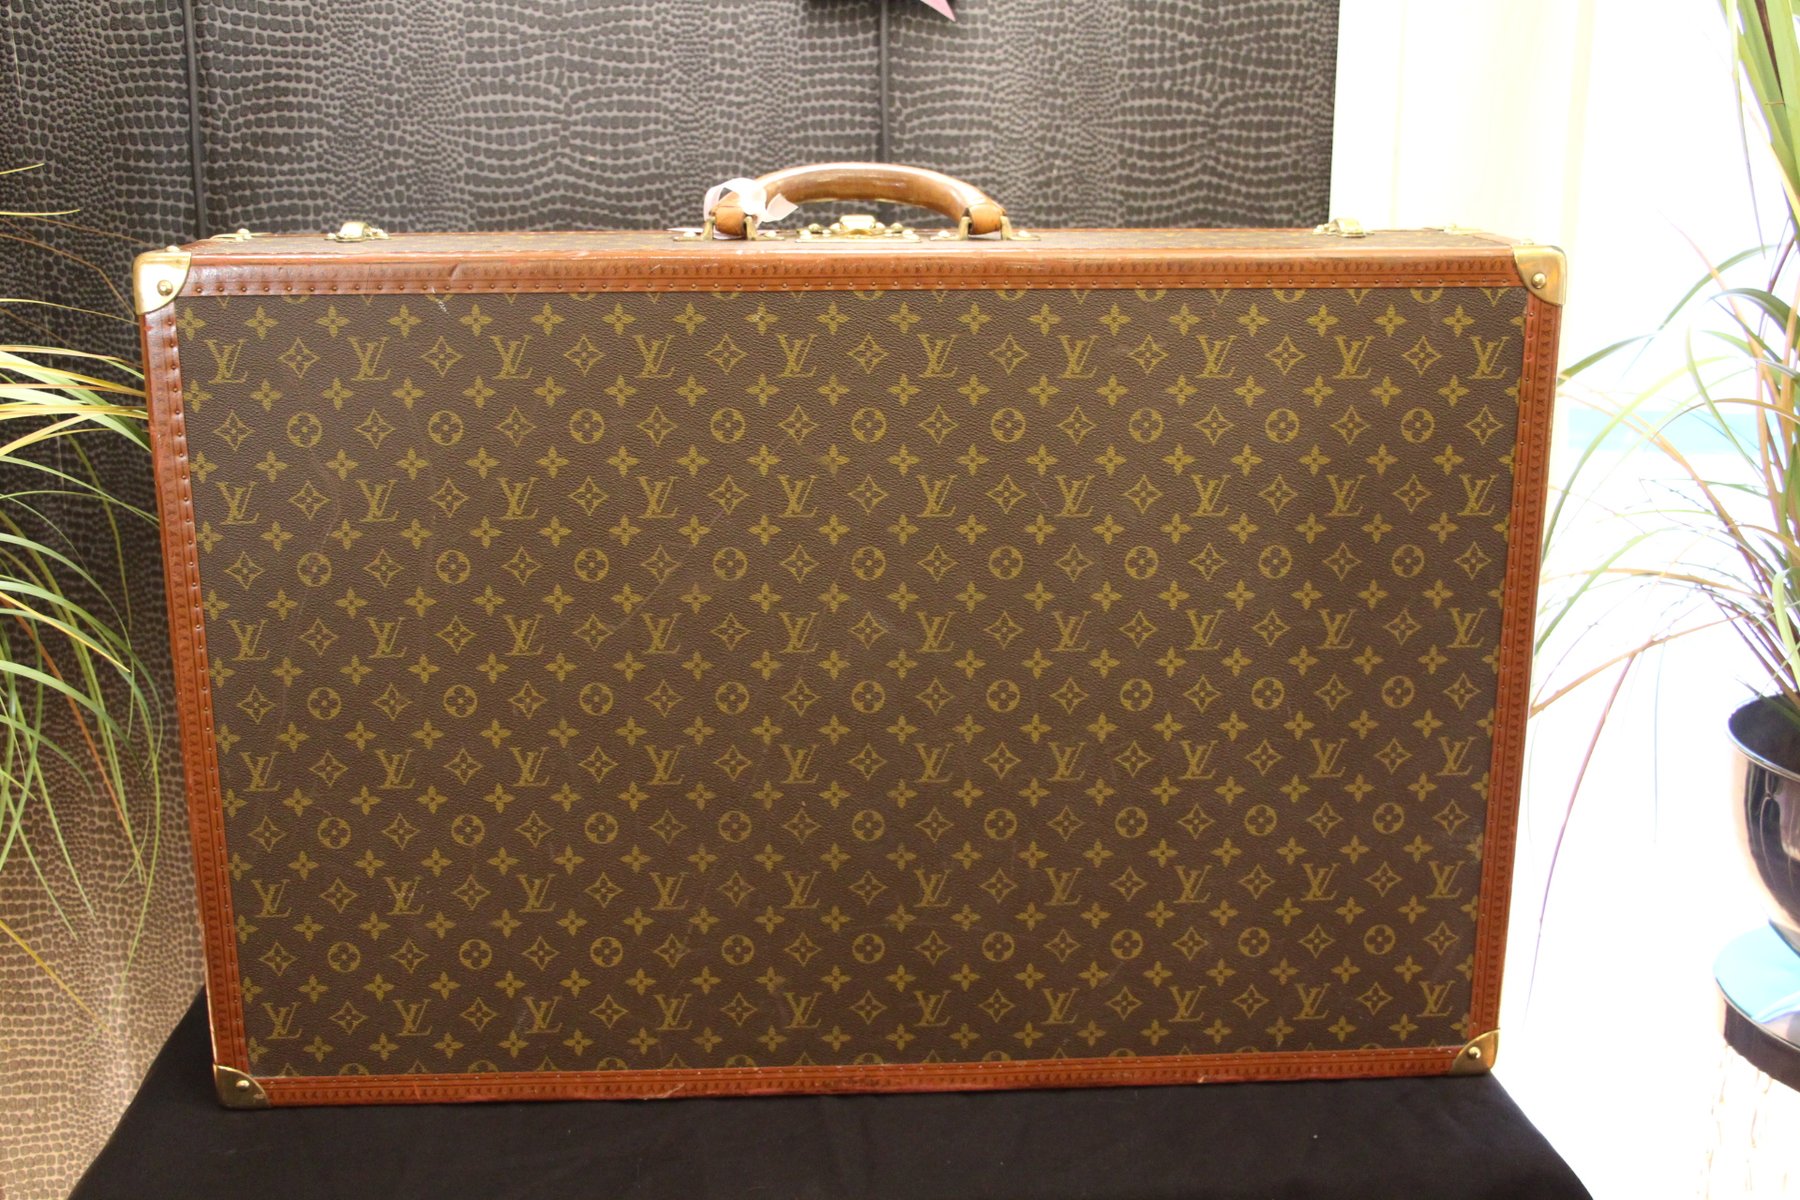 Monogram Suitcase from Louis Vuitton, 1970s for sale at Pamono